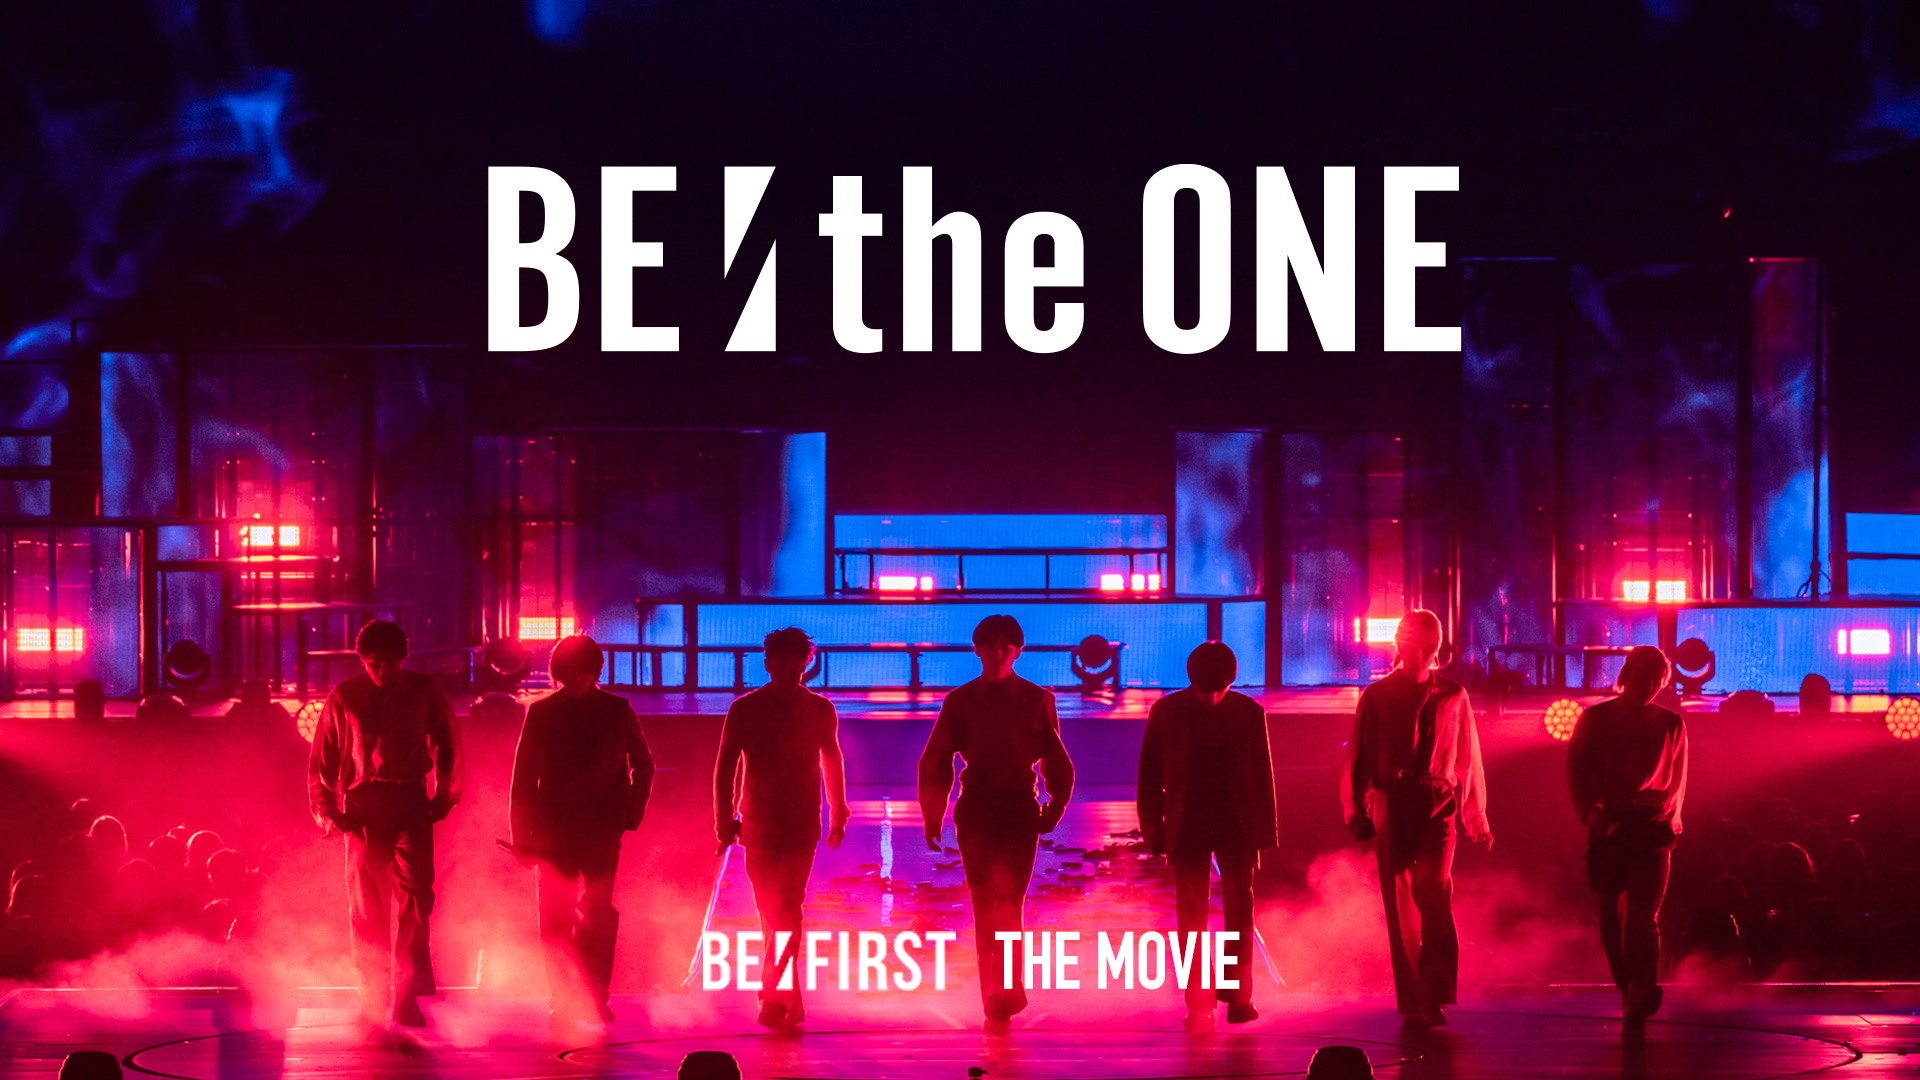 BE:FIRST 初ライブドキュメンタリー映画「BE:the ONE」の予告動画を公式YouTubeで公開